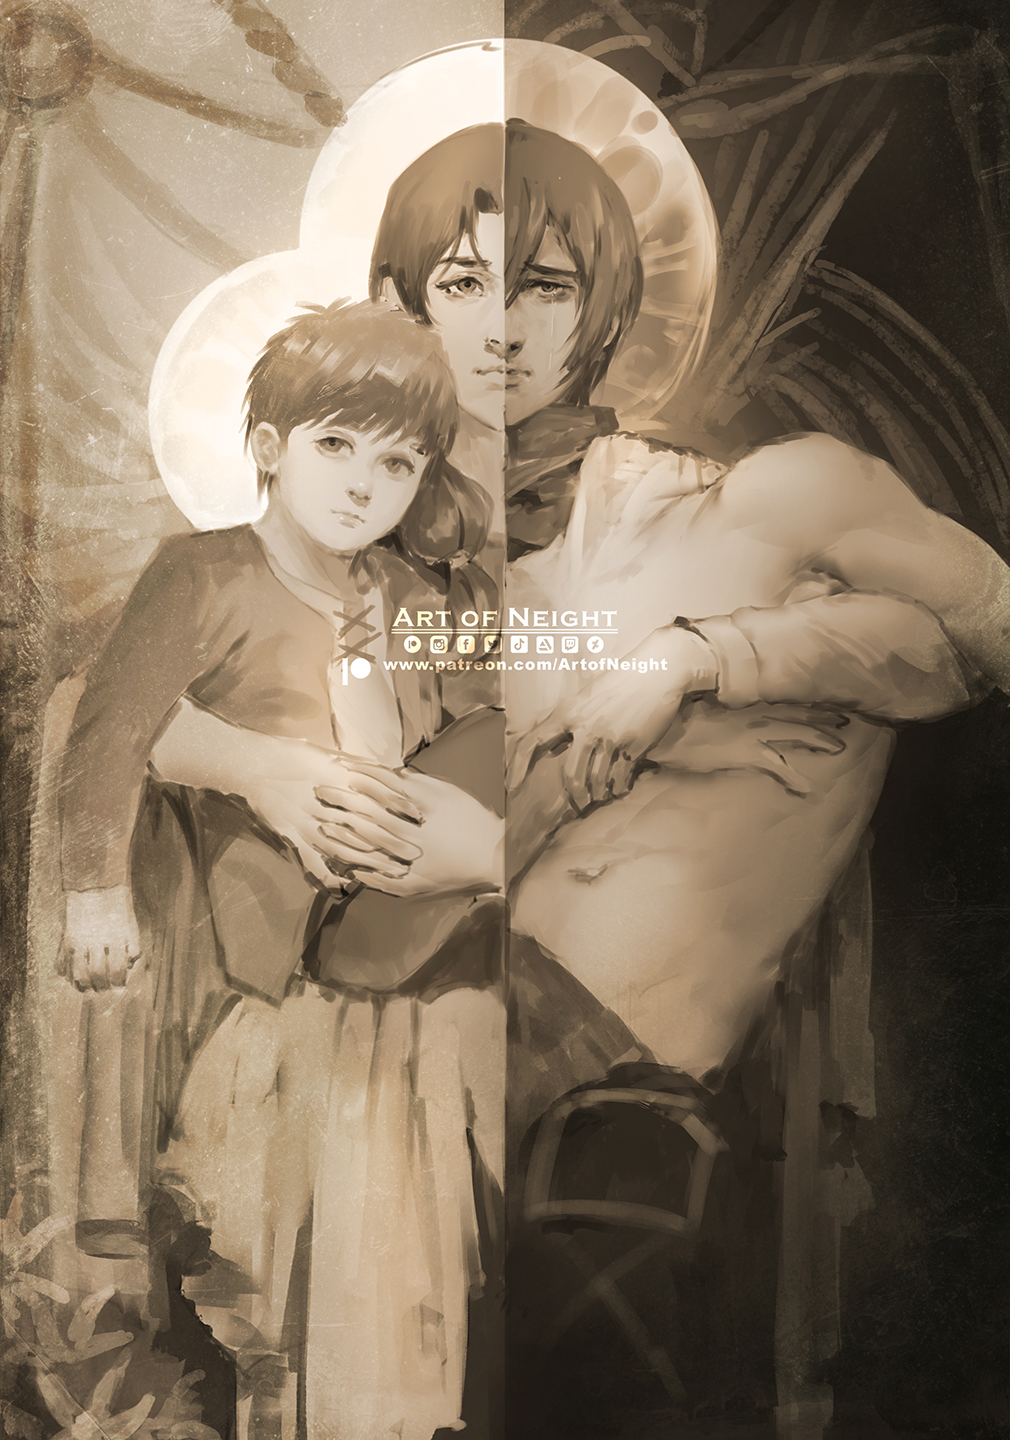 1boy 2girls age_comparison art_of_neight brown_theme carla_yeager carrying carrying_person contrast death decapitation eren_yeager full_moon headless highres looking_at_viewer mikasa_ackerman moon mother_and_son multiple_girls sad shingeki_no_kyojin split_theme spoilers sun symbolism